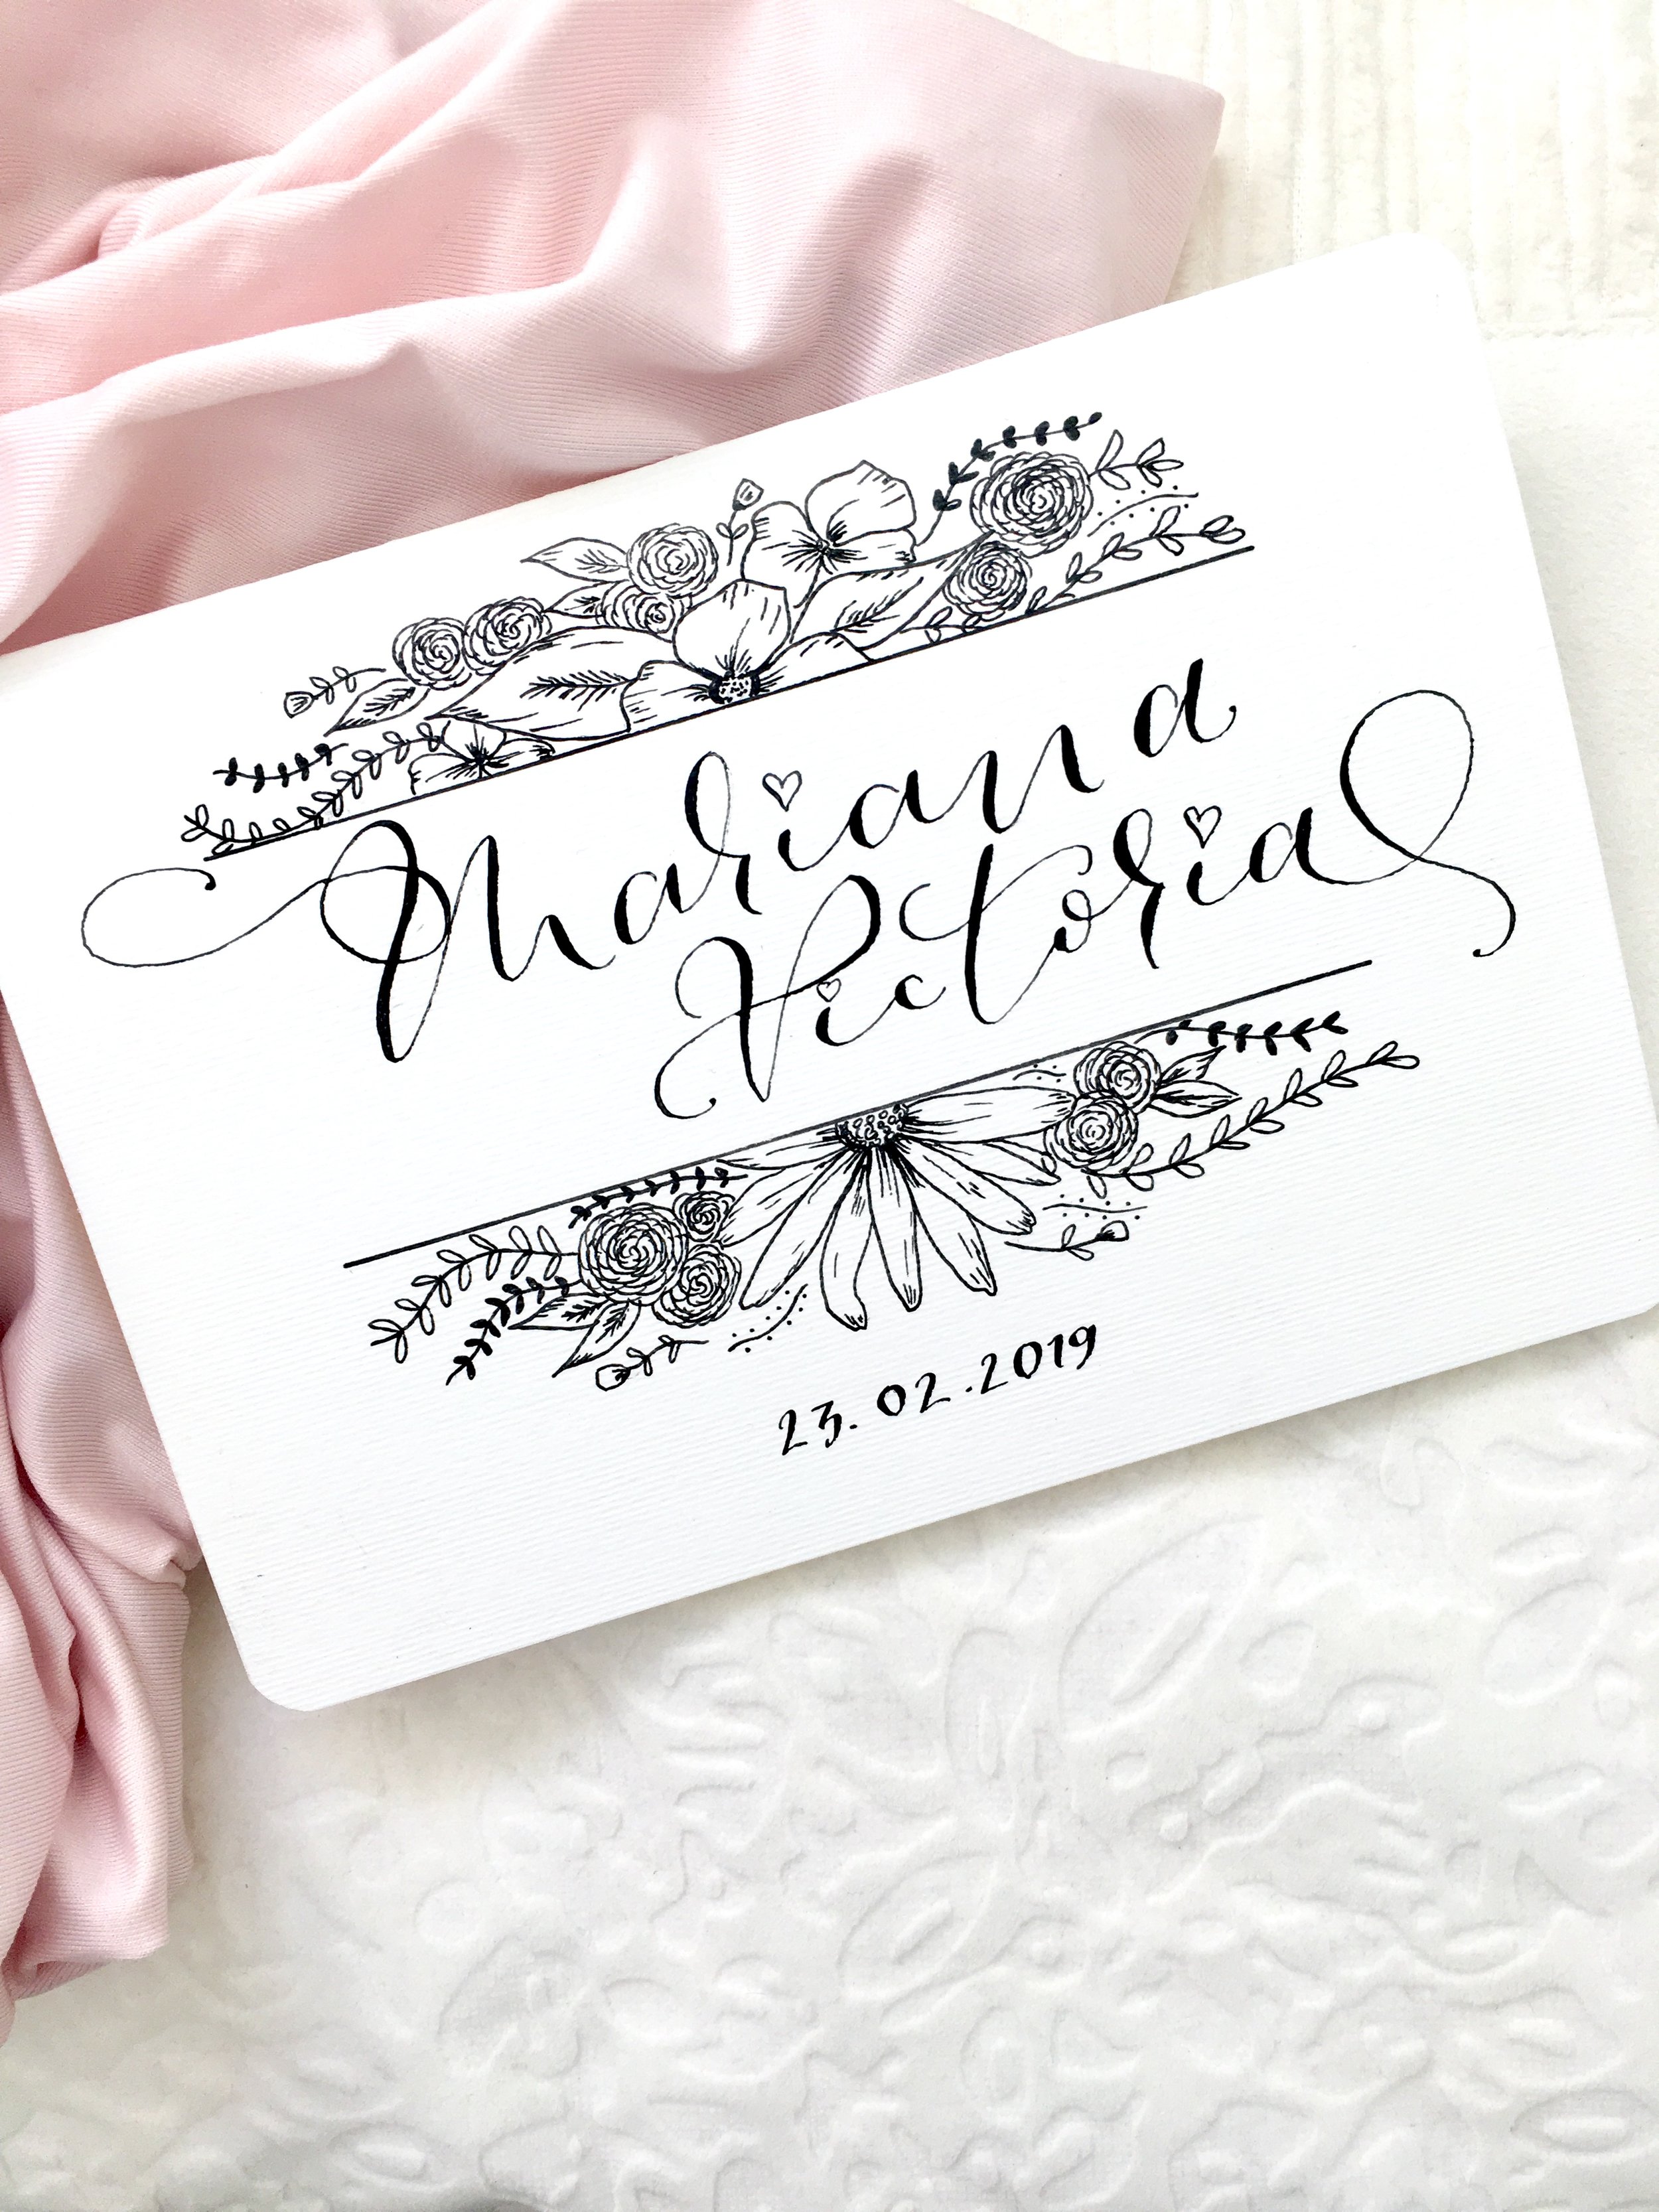 Personalised hand lettered card with floral illustration.jpg